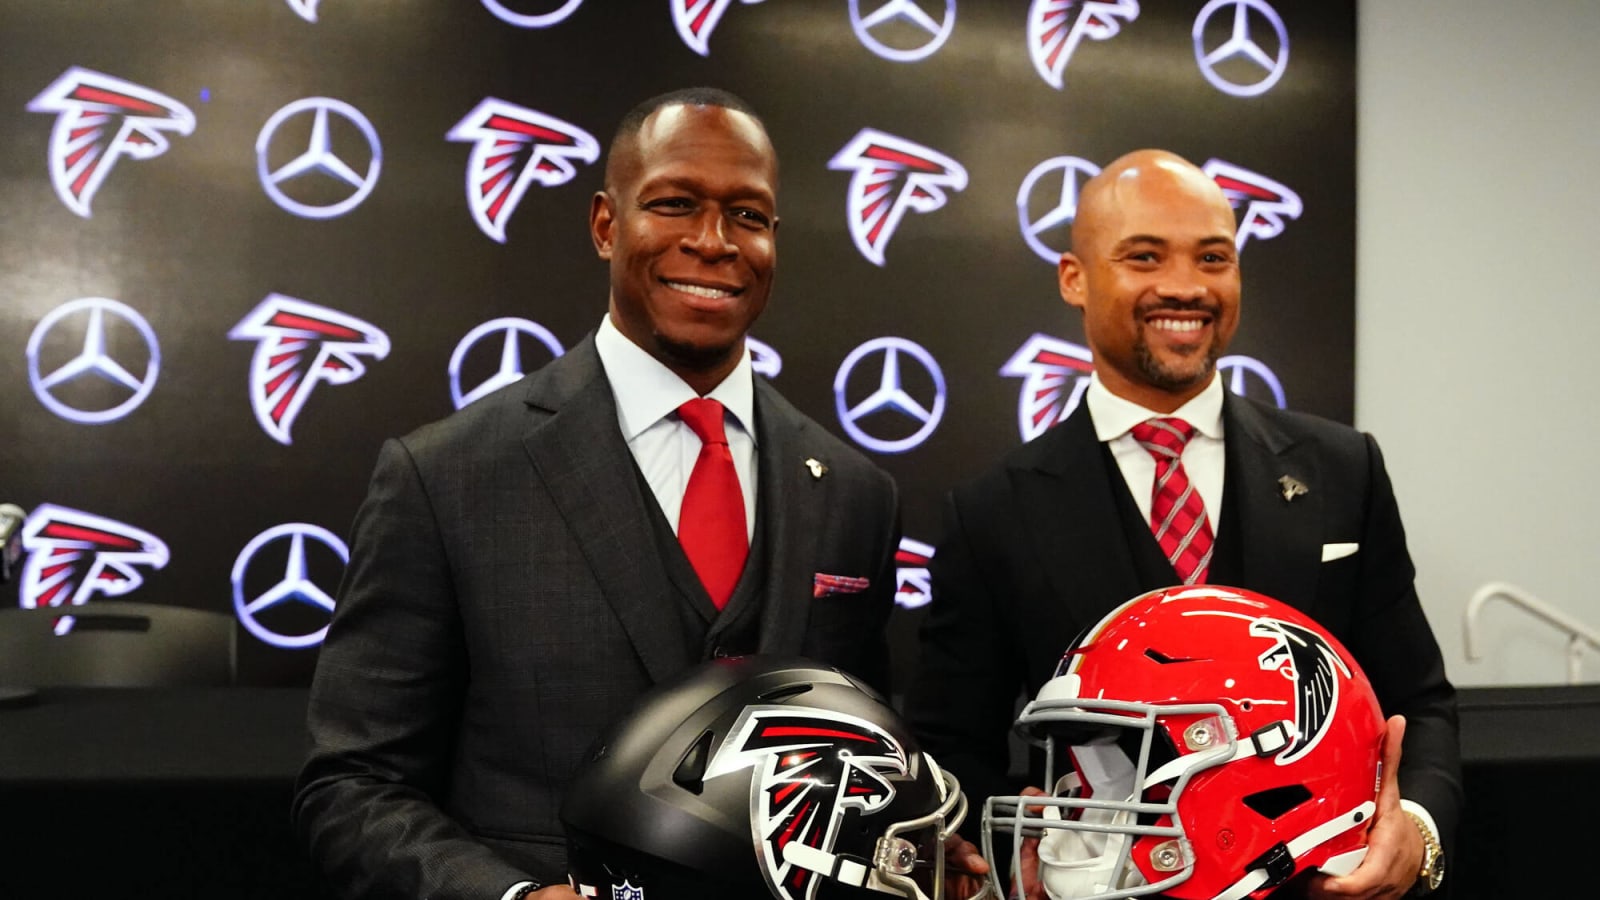 Falcons first-round pick could surprise everyone, says draft expert